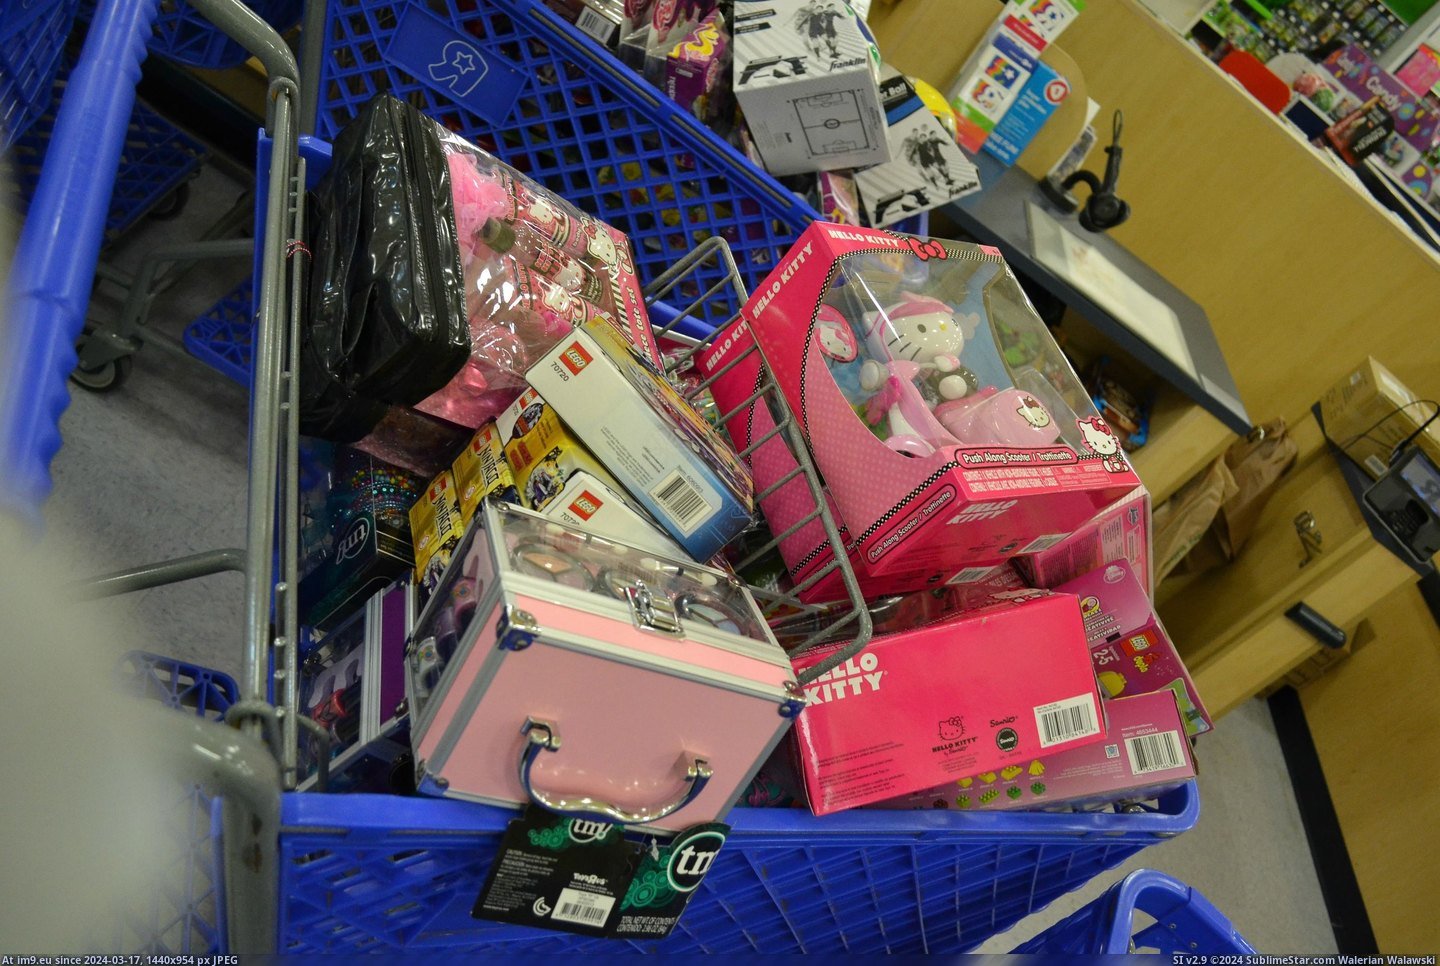 #For #Happy #All #Bunch #Tots #Donated #Christmas #Toys #Kids [Pics] Hopefully this makes a bunch of kids happy this Christmas all donated to Toys for Tots. 3 Pic. (Bild von album My r/PICS favs))